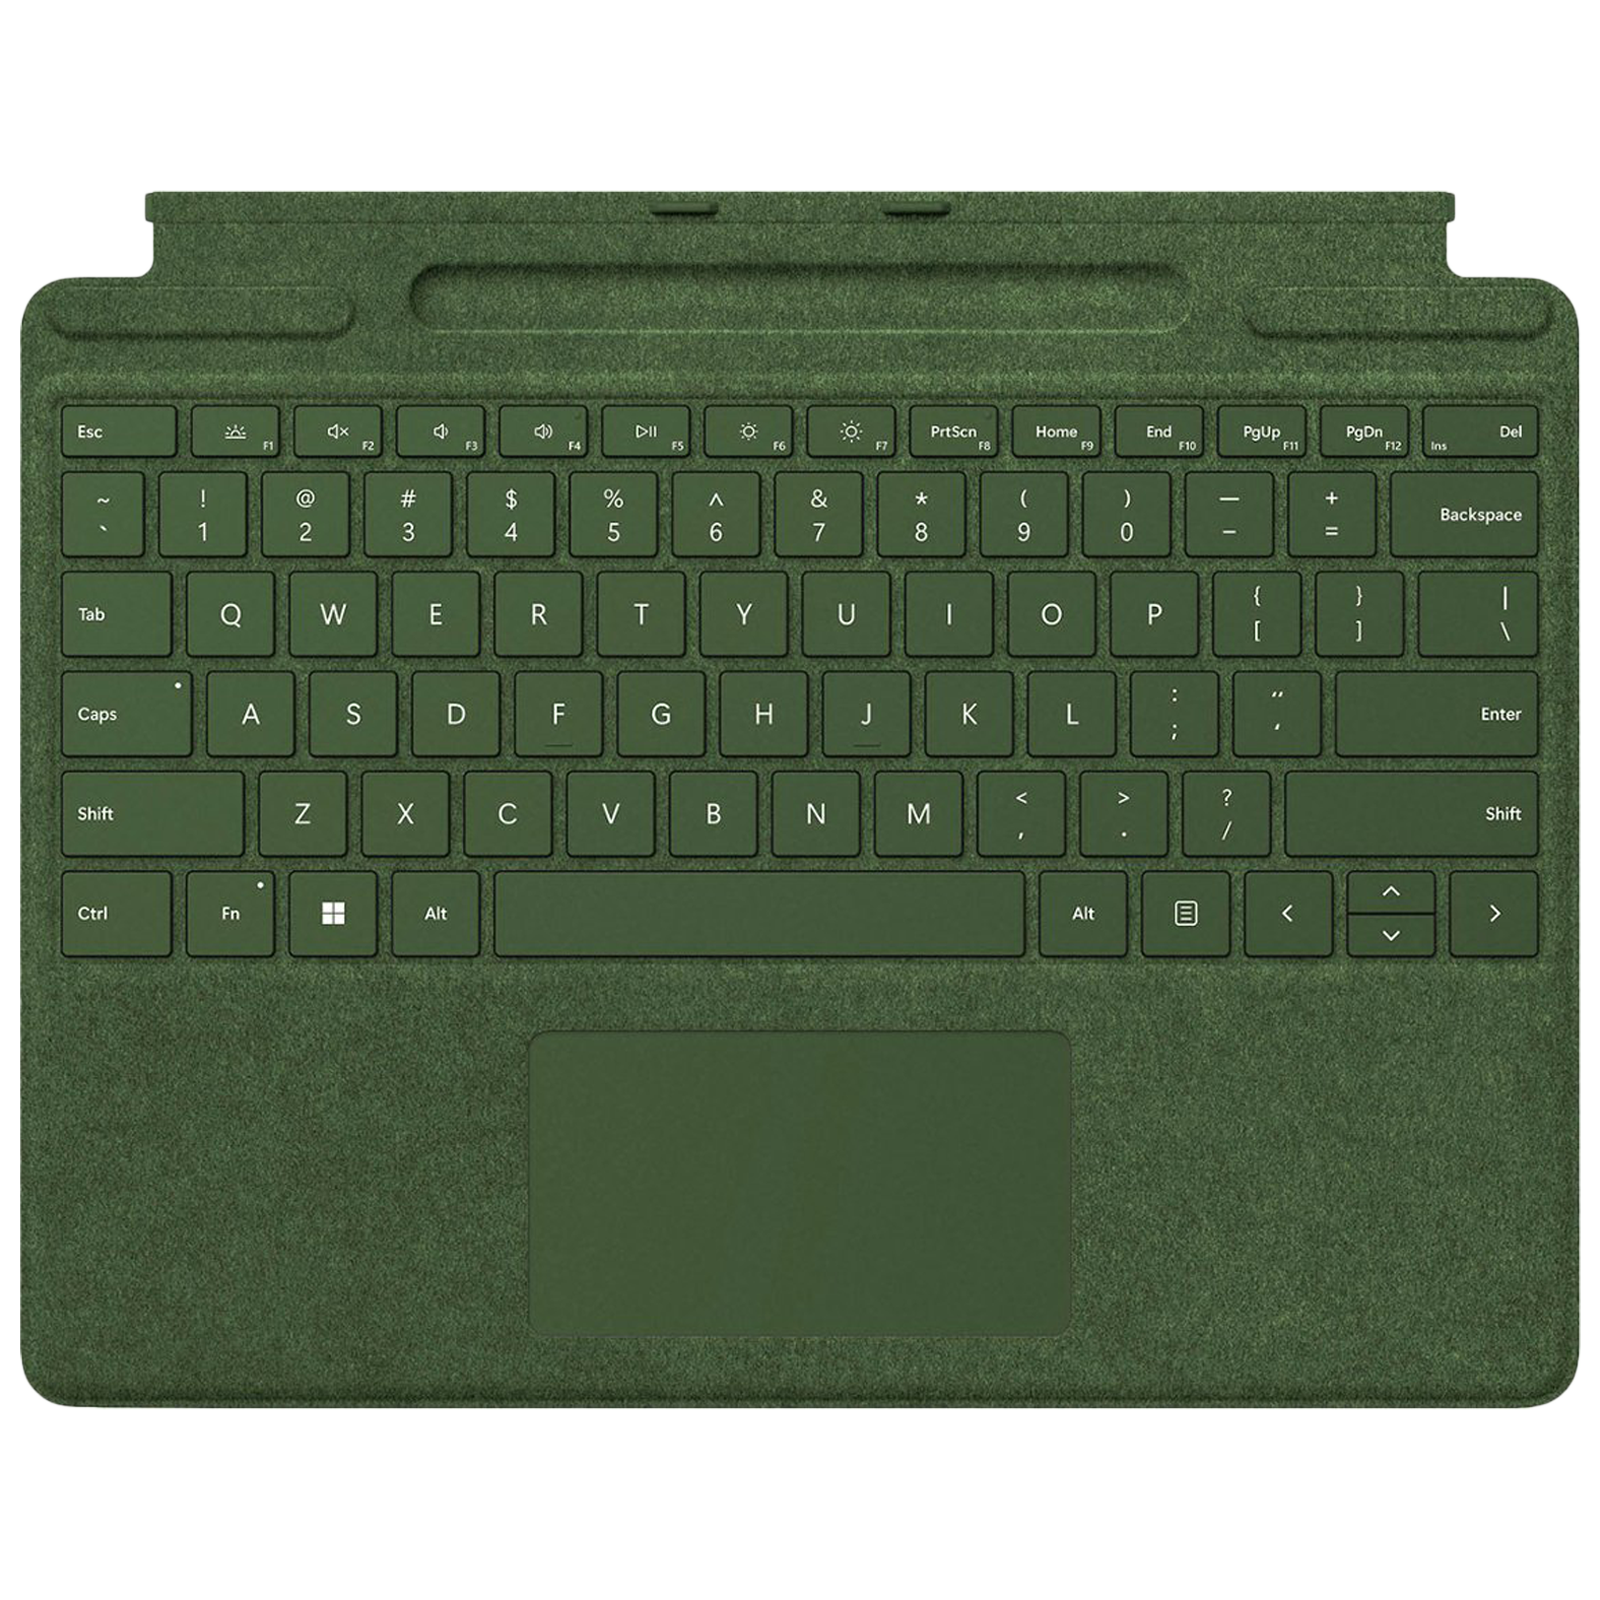 Microsoft Wireless Keyboard with Touchpad (Built-in Kickstand, Forest)